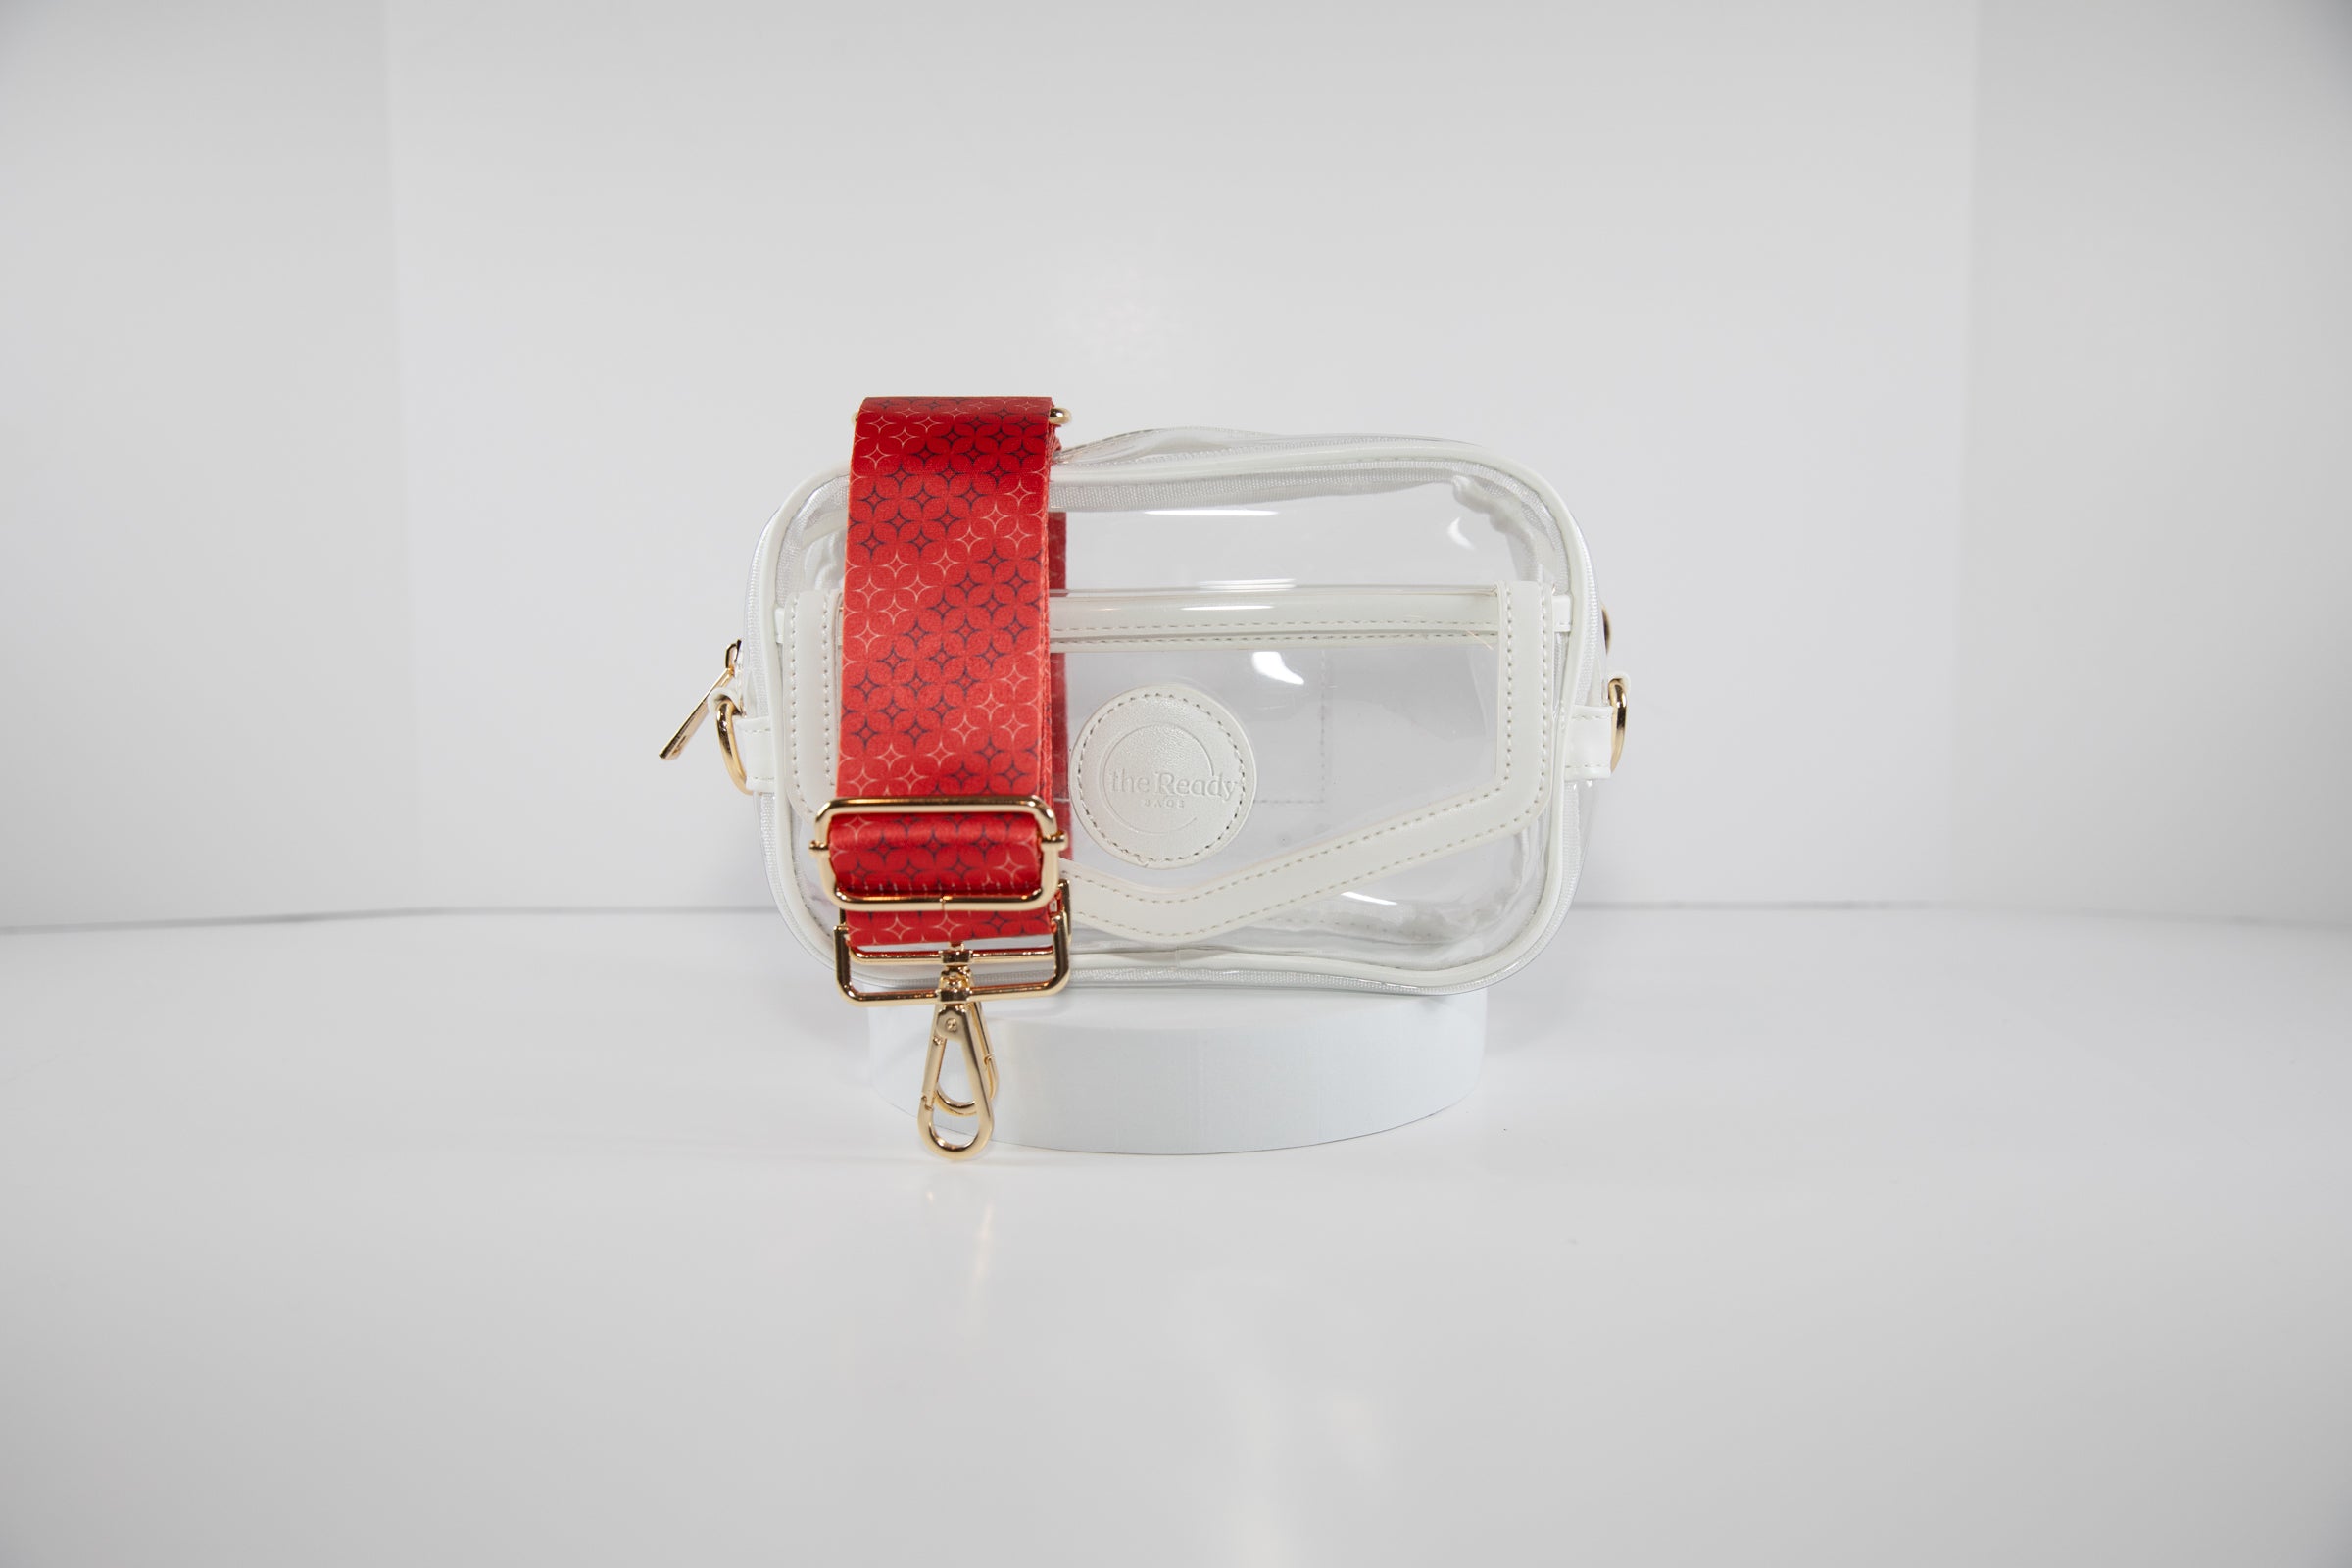 Clear stadium bag with white leather trim, front facing, with an adjustable crossbody strap in Boston Red Sox team colors.